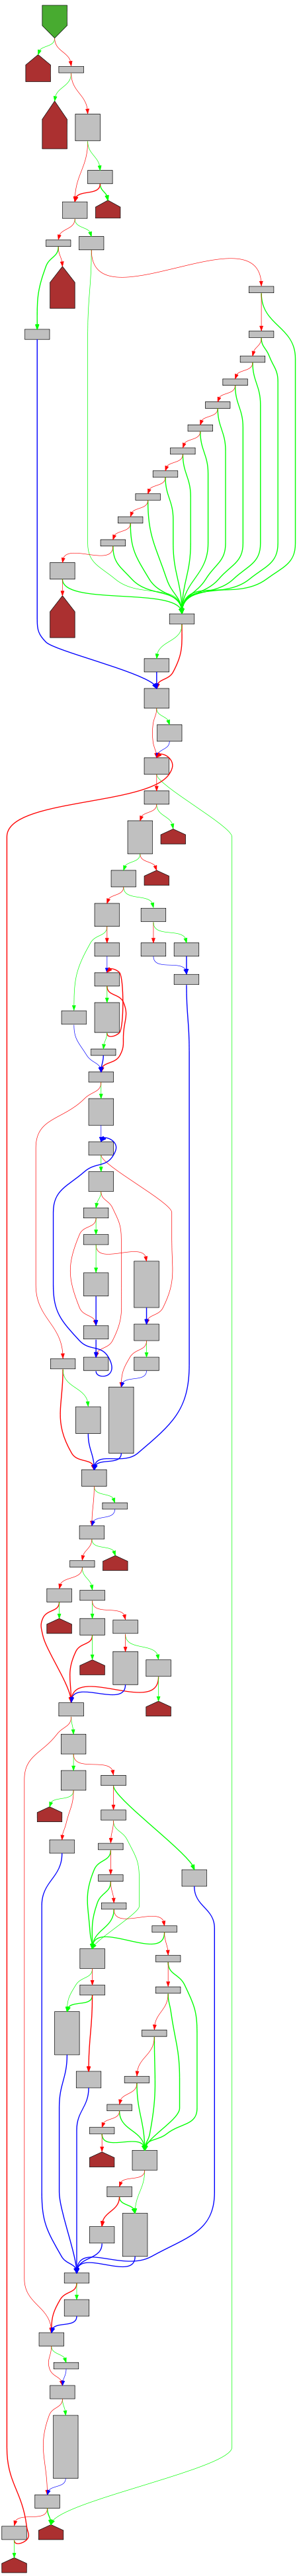 Control flow graph of object